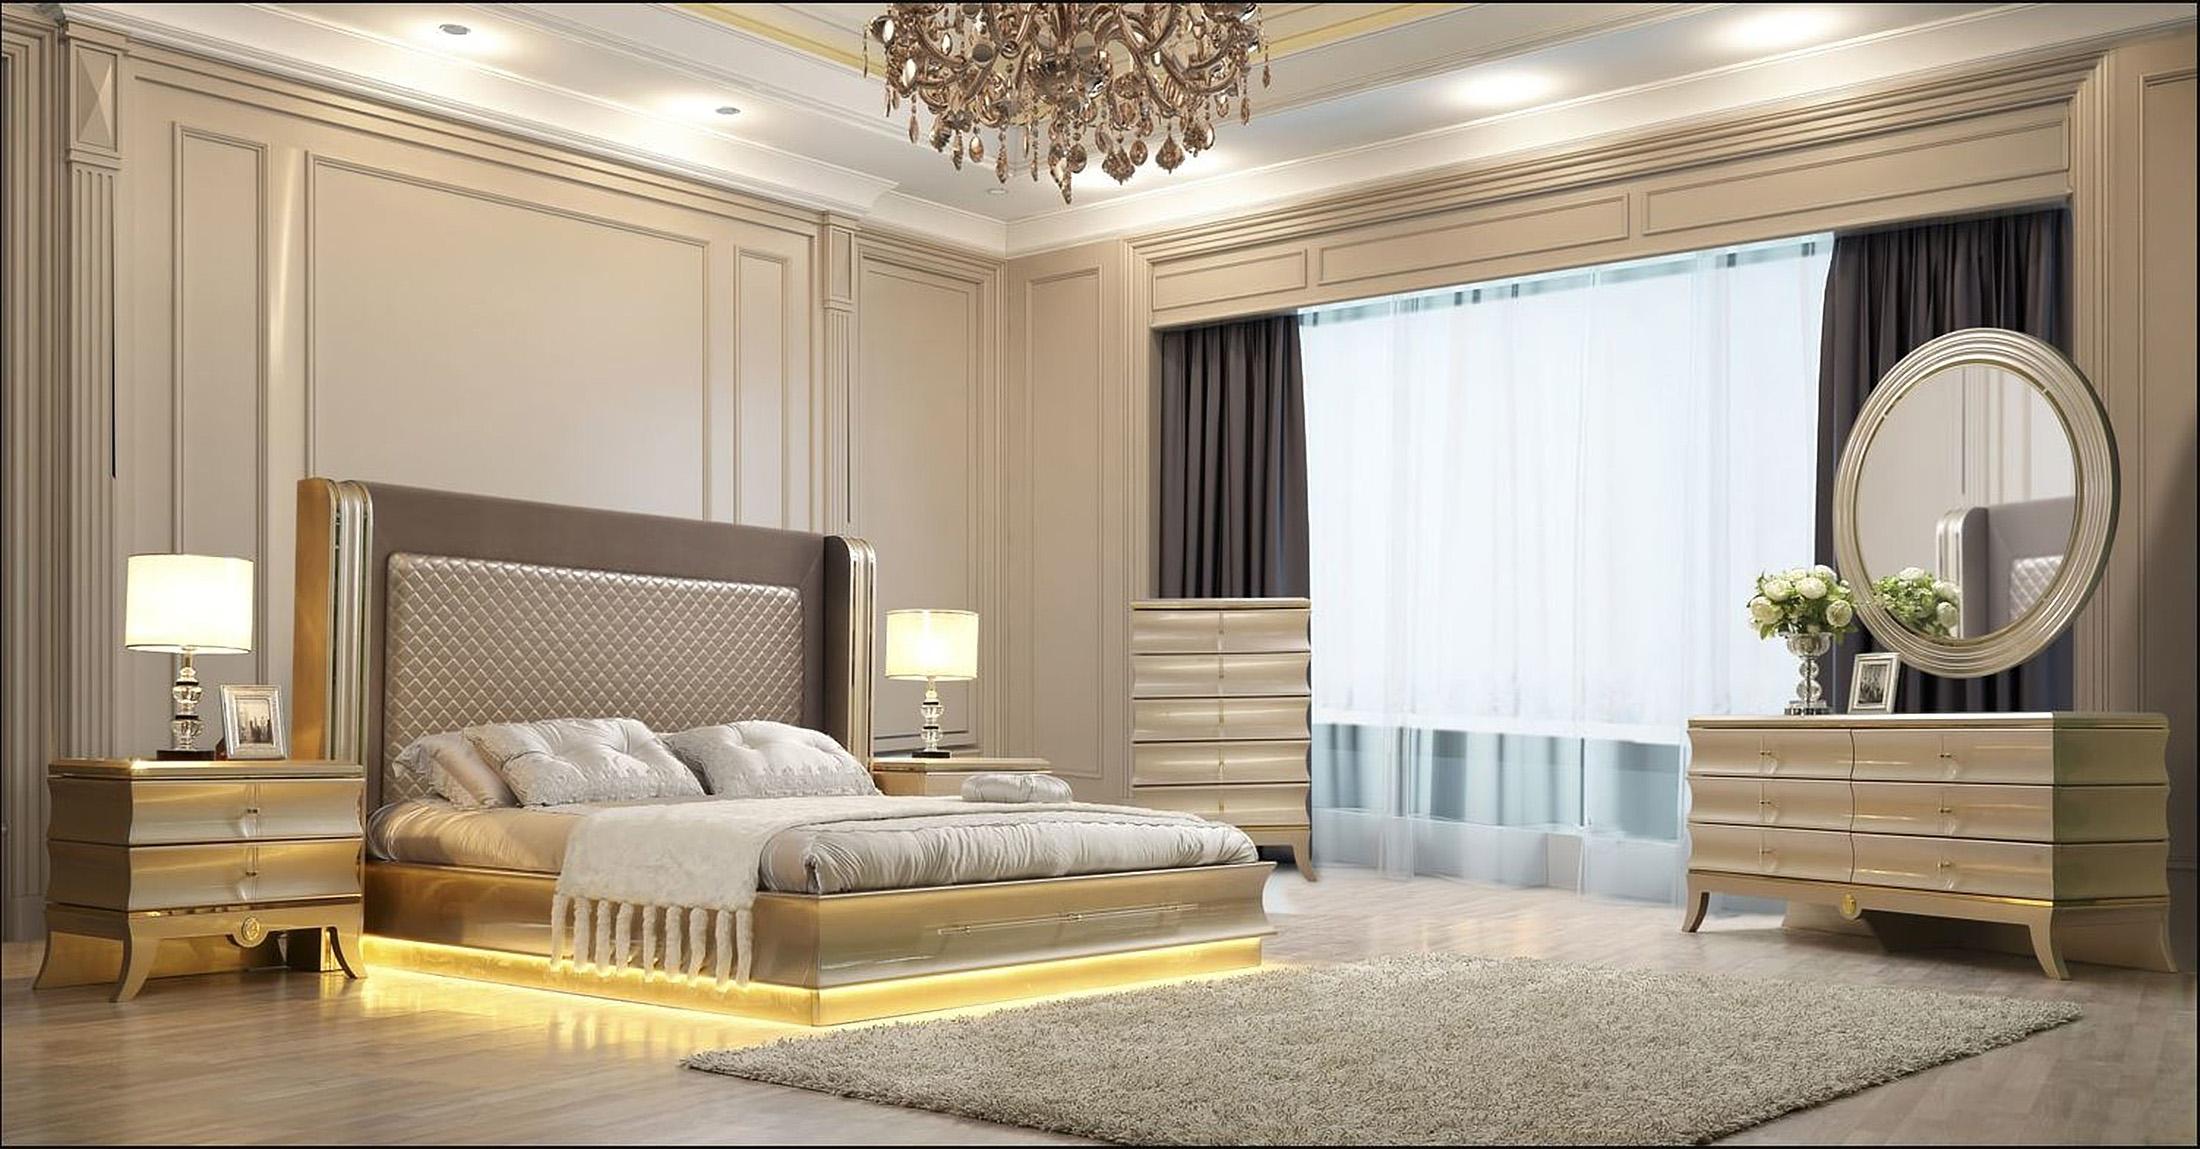 

    
Glam Belle Silver & Gold King Bedroom Set 6Pcs Contemporary Homey Design HD-925
